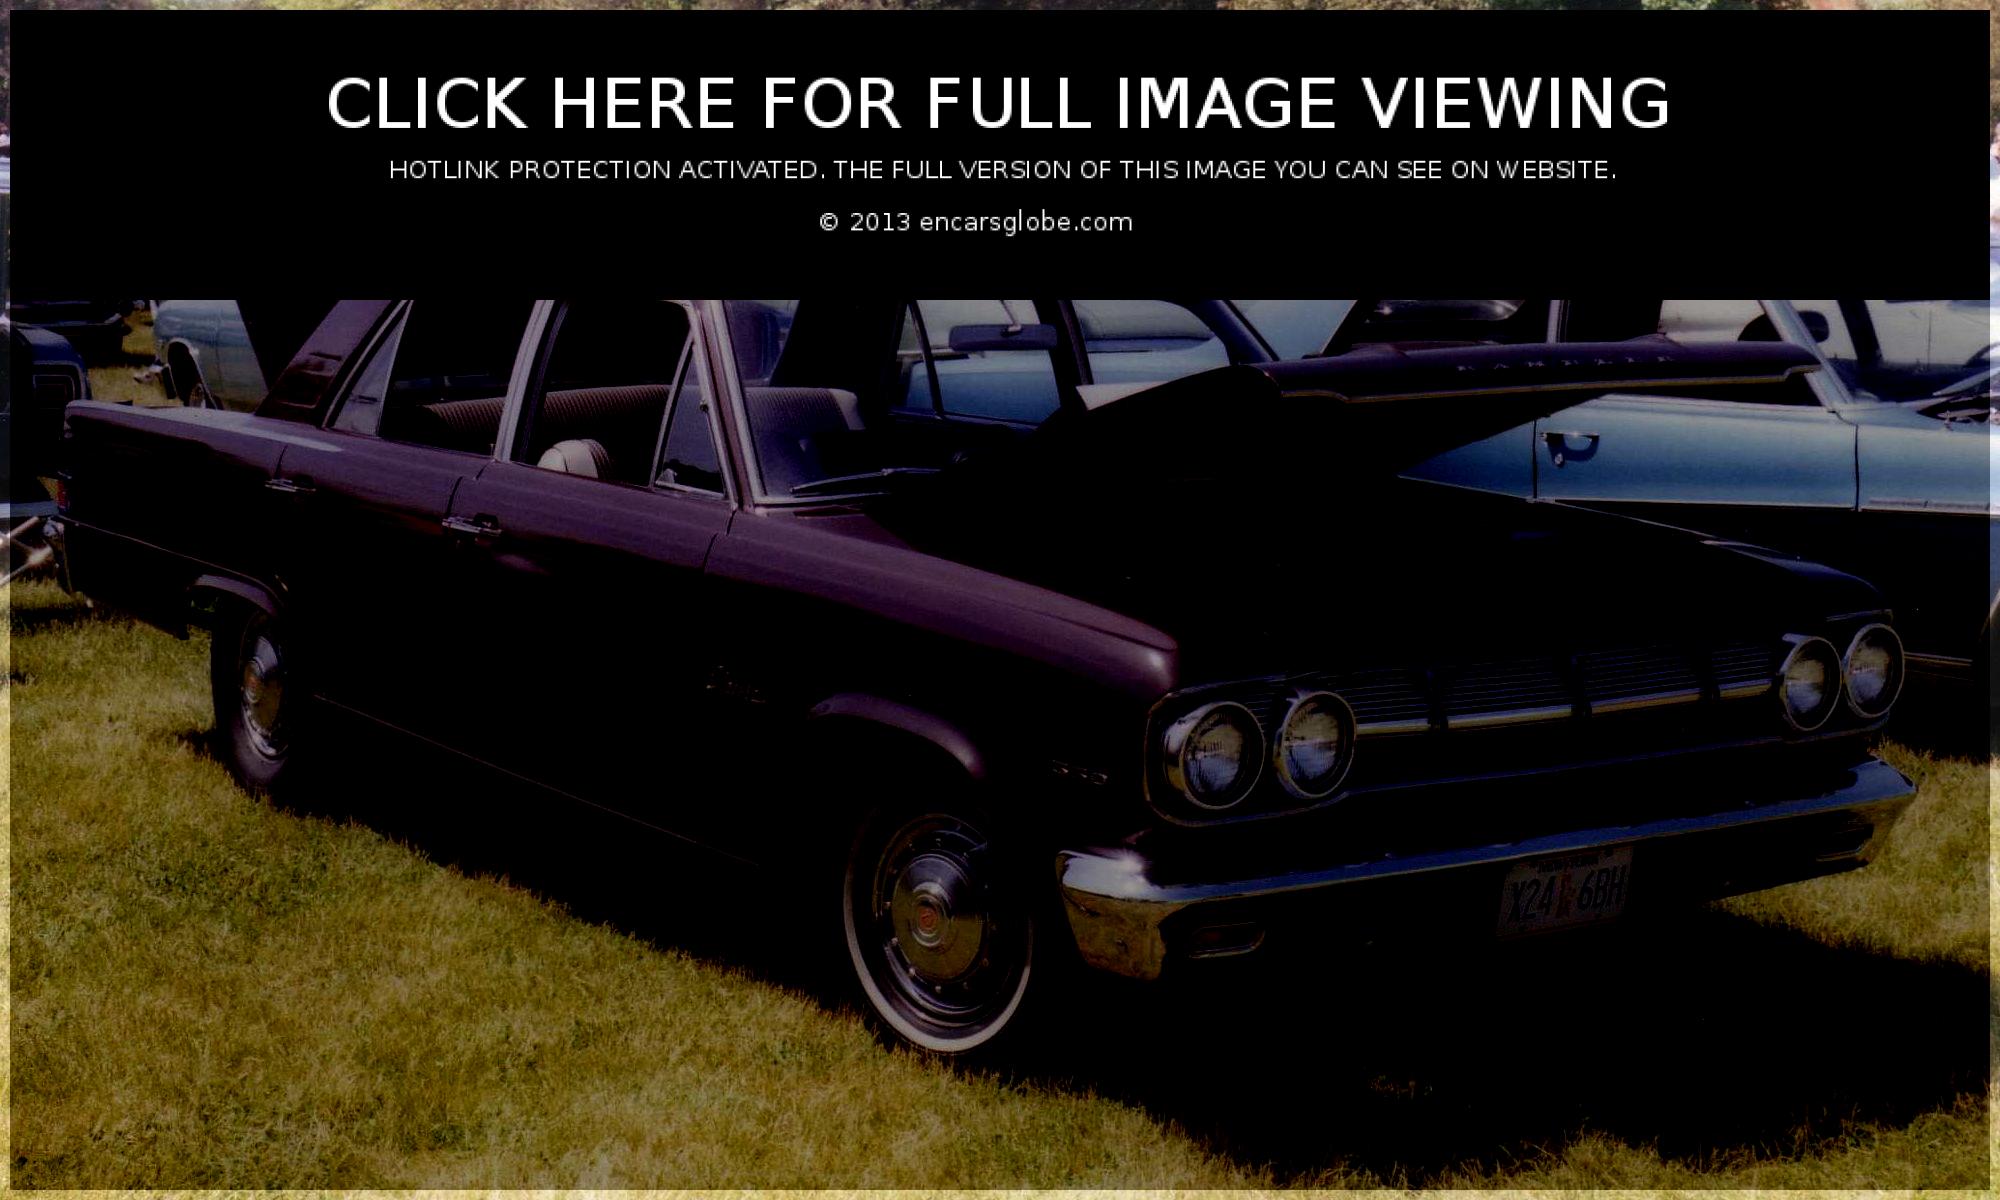 Rambler American 220 4dr Photo Gallery: Photo #08 out of 10, Image ...